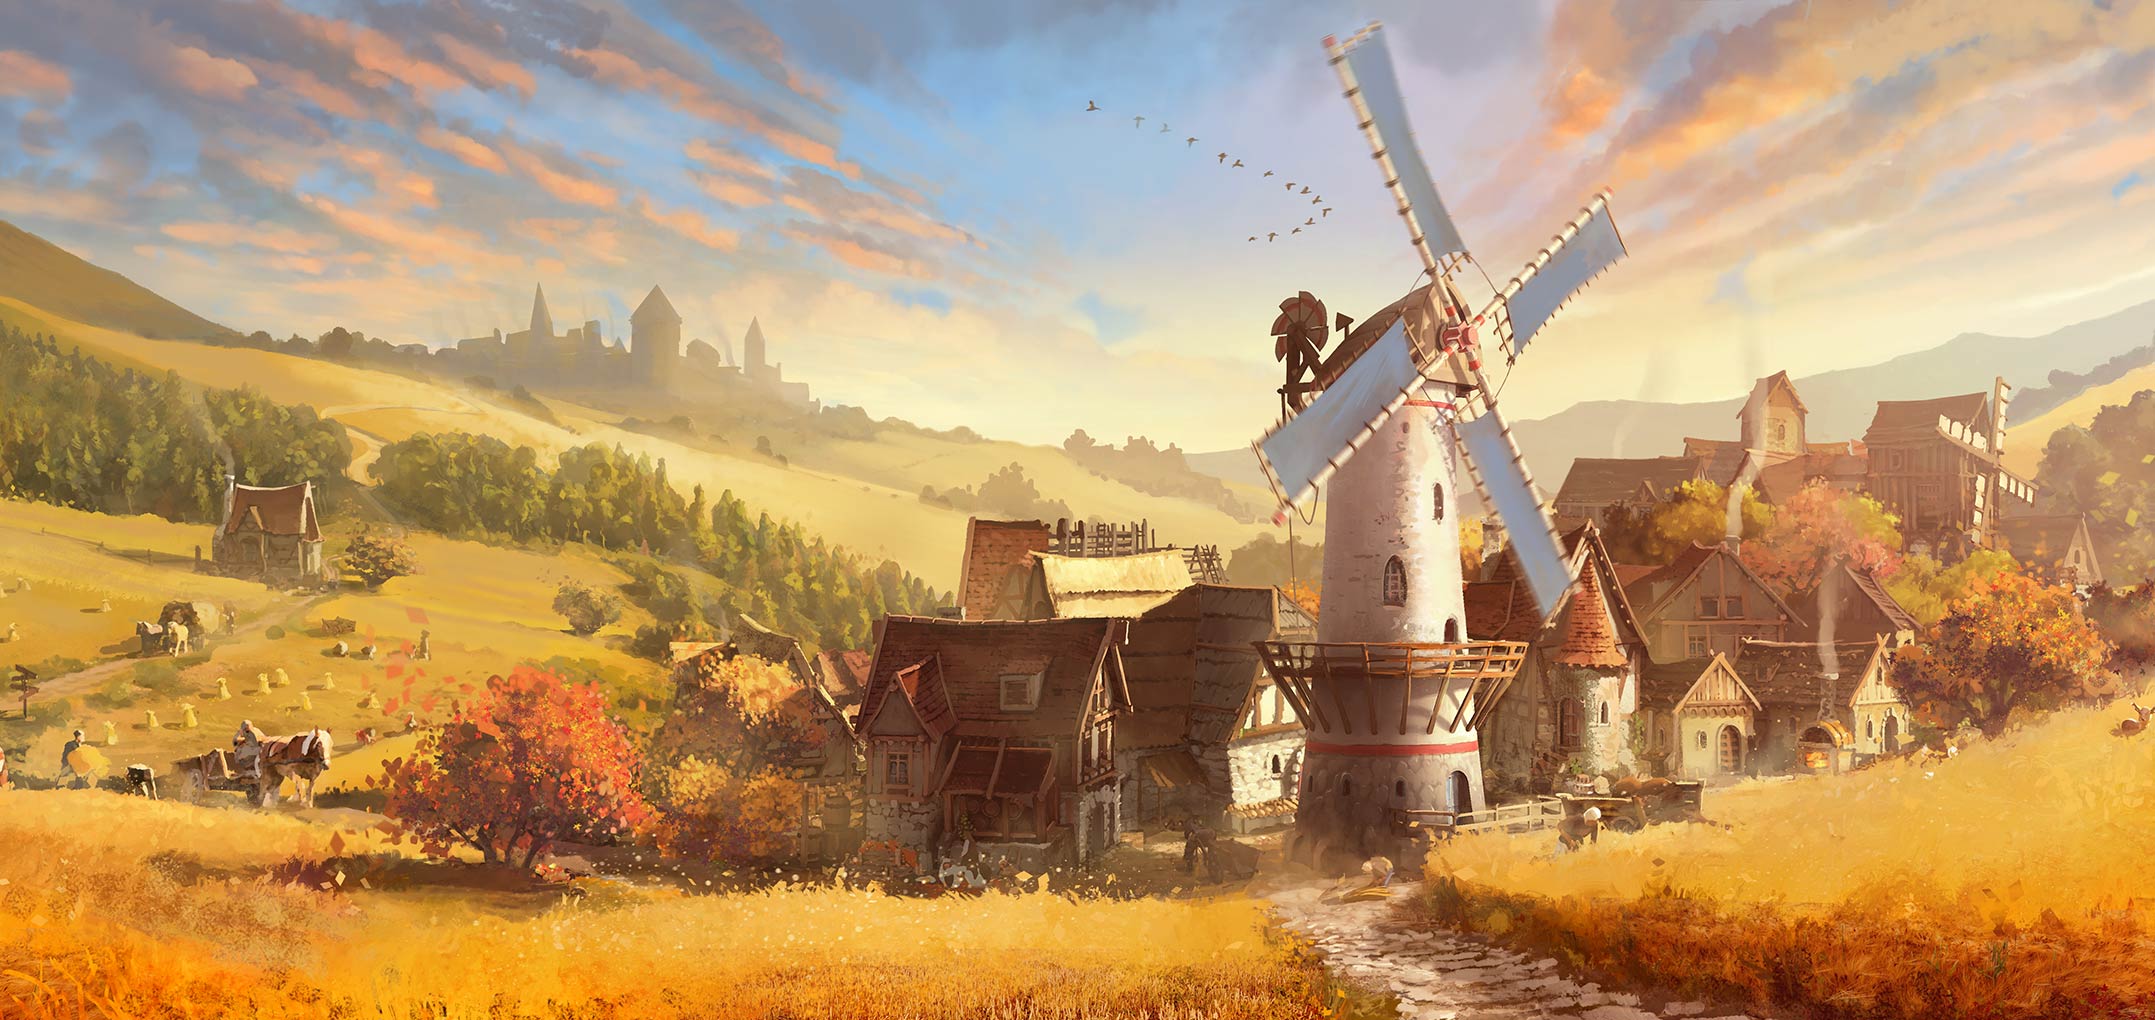 Illustration Video Games Forge Of Empires Building Video Game Art House Windmill Field Landscape Clo 2155x1020